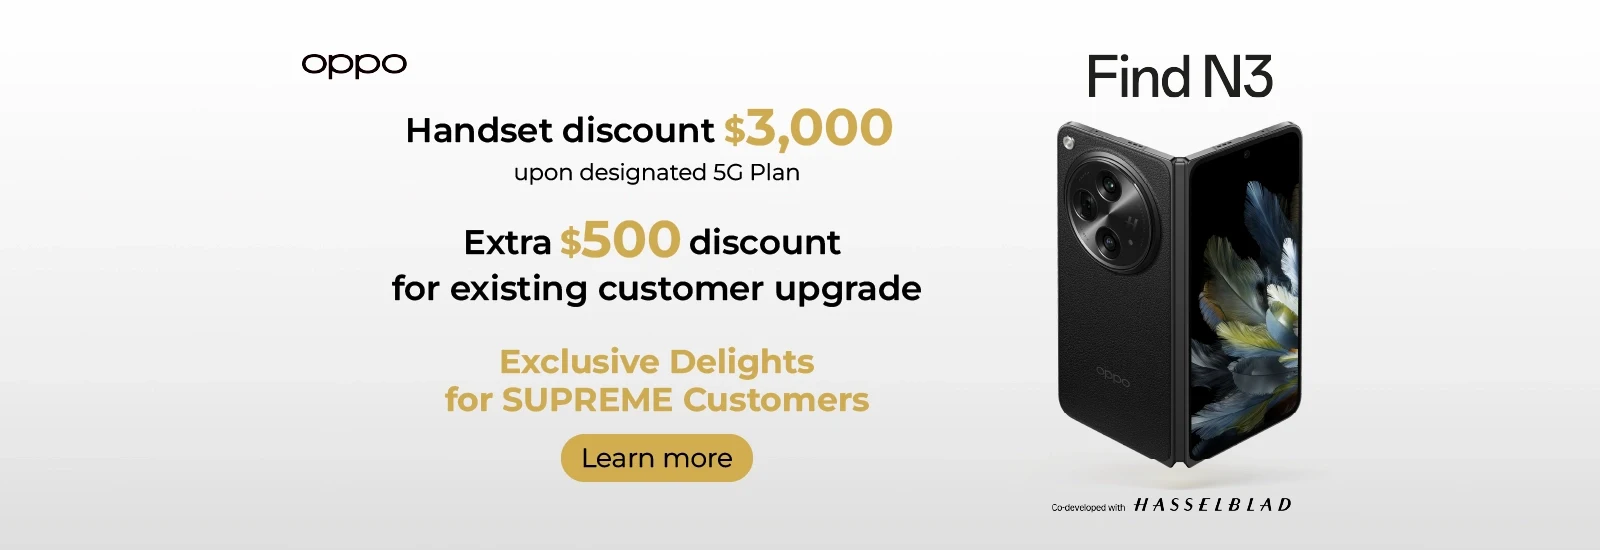 Special standalone discount $1,750 upon 5G SIM Subscription